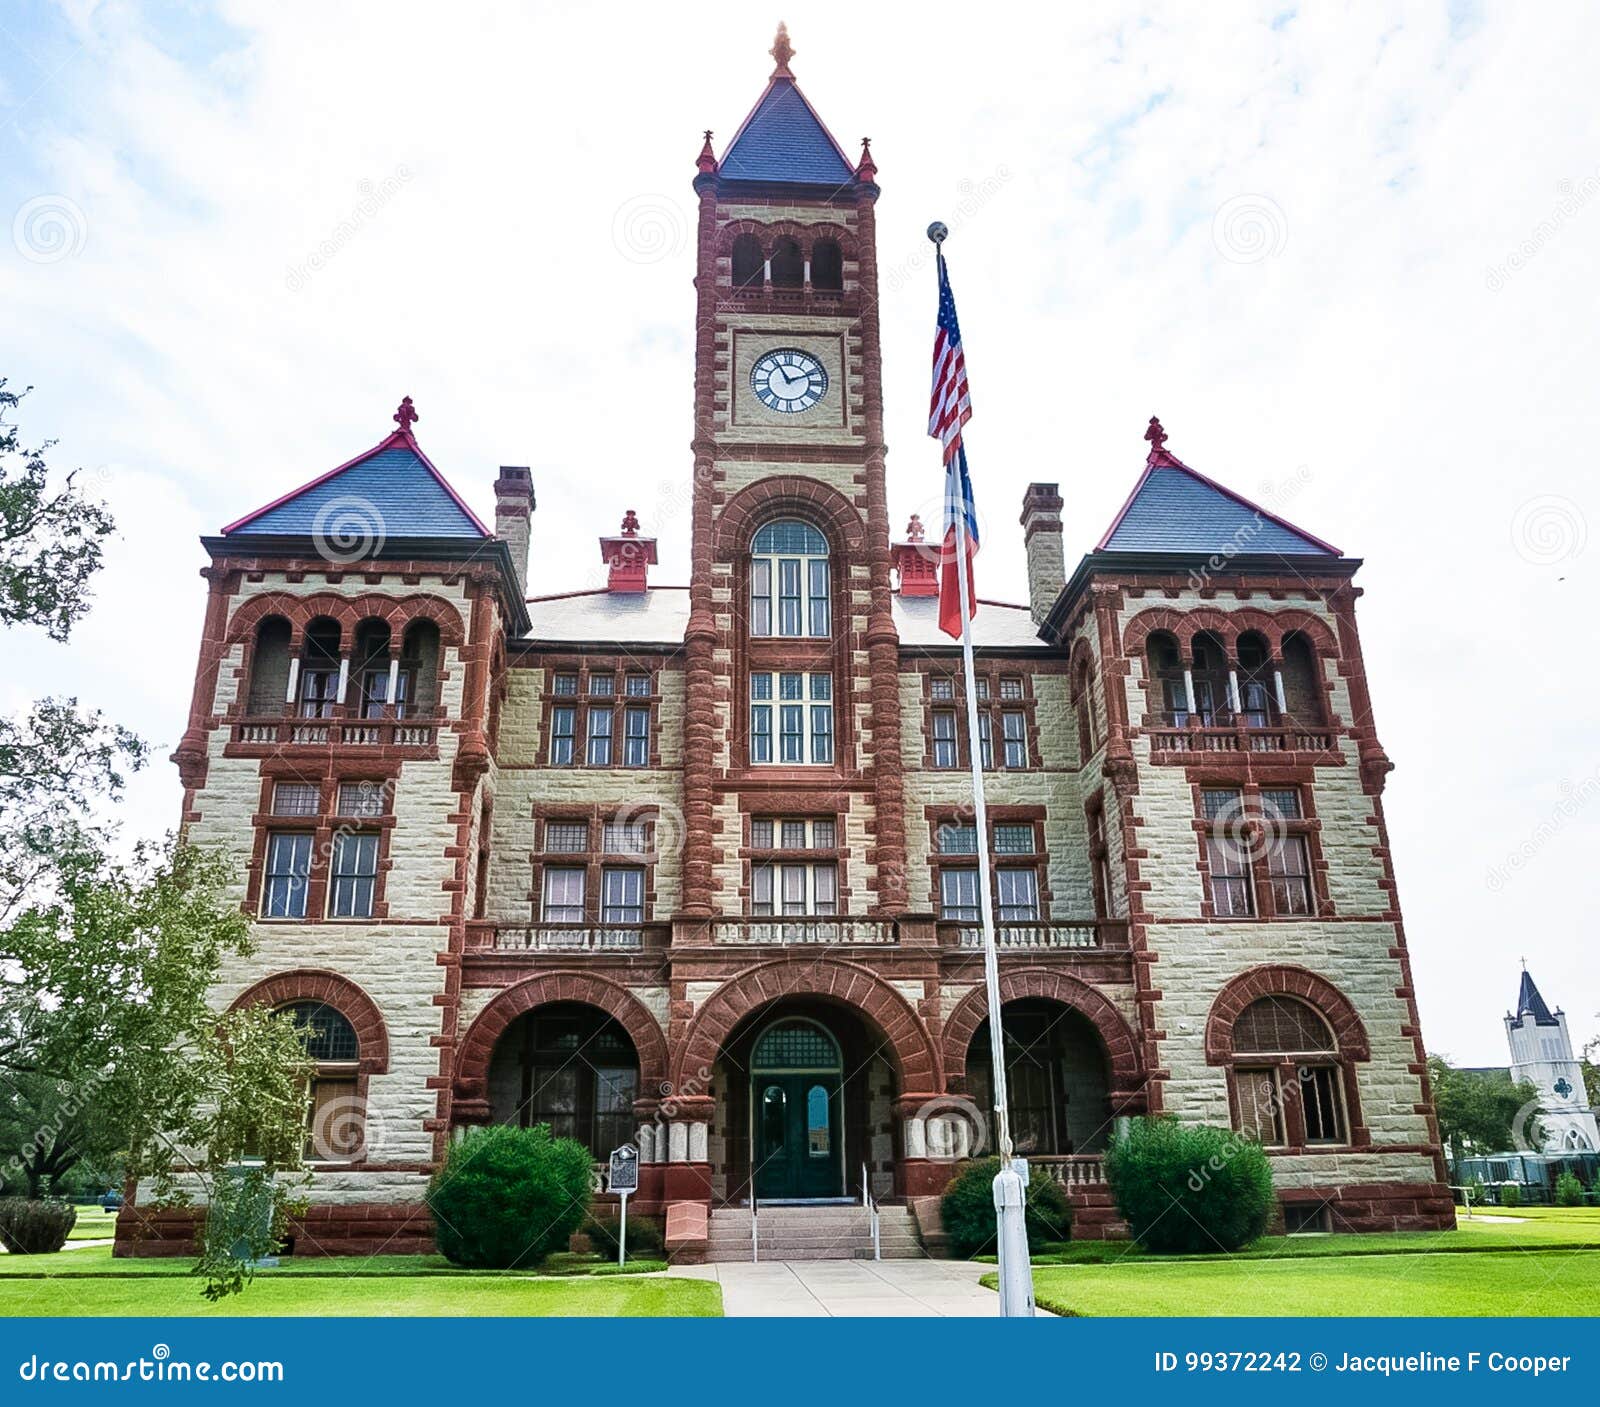 the historical de witt county courthouse in cuero, texas along t